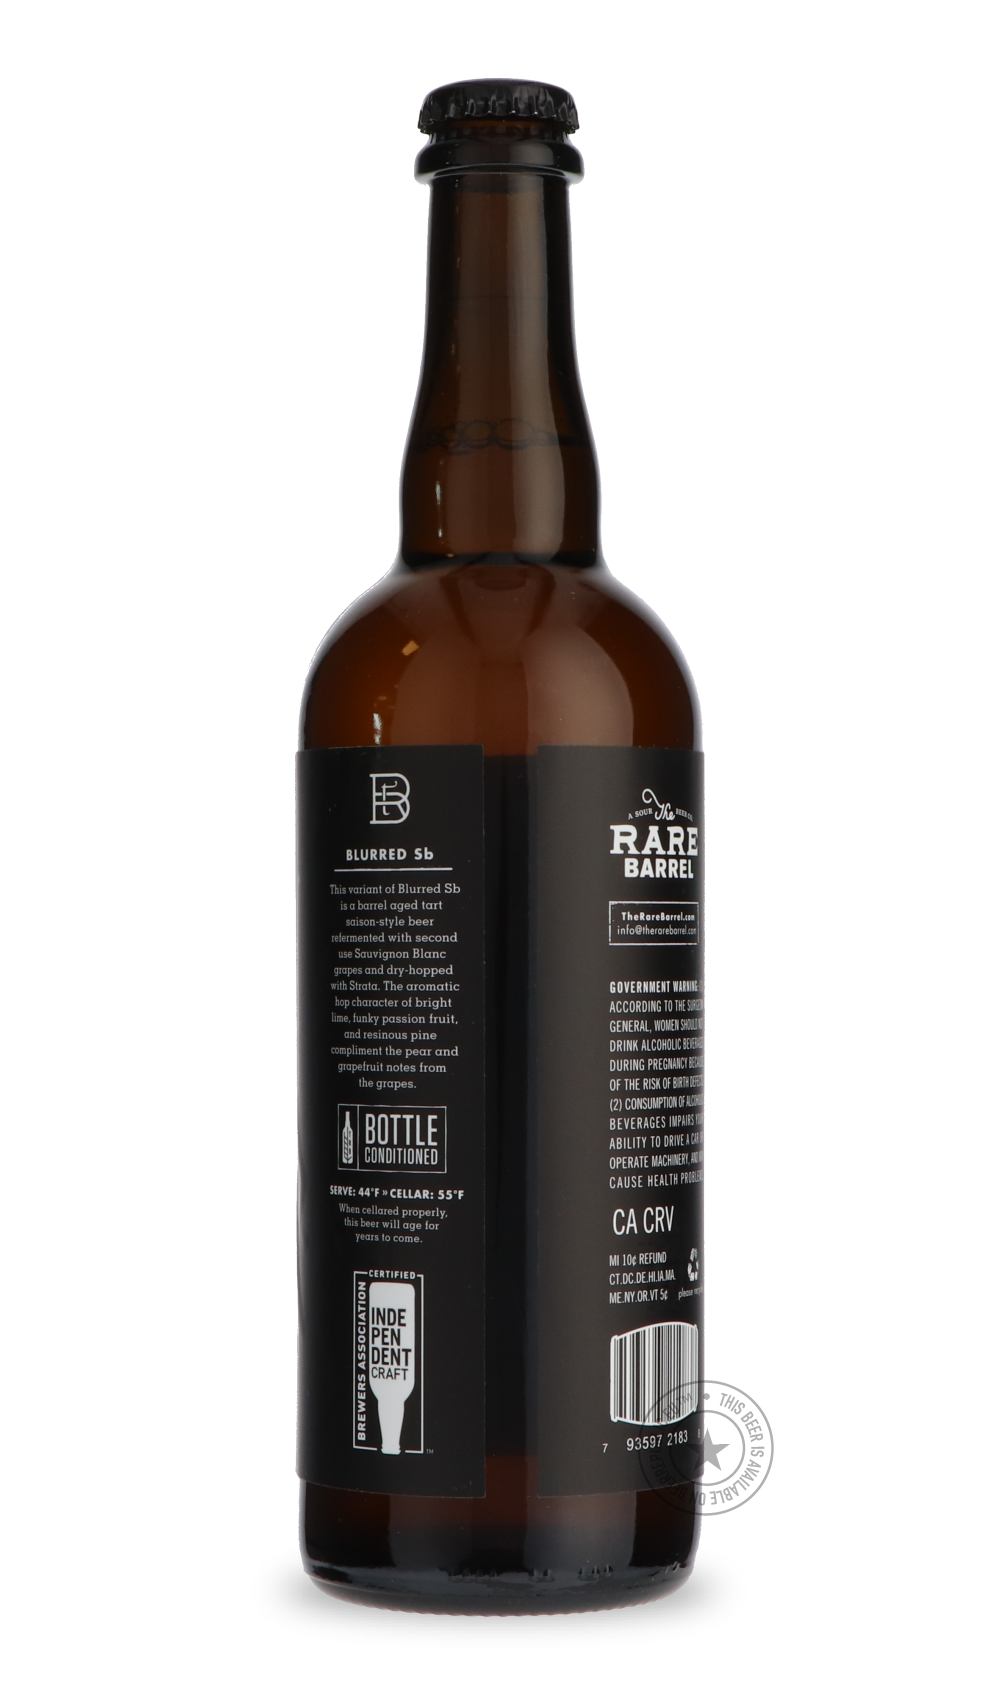 -The Rare Barrel- Blurred Sb Dry Hopped '19-Sour / Wild & Fruity- Only @ Beer Republic - The best online beer store for American & Canadian craft beer - Buy beer online from the USA and Canada - Bier online kopen - Amerikaans bier kopen - Craft beer store - Craft beer kopen - Amerikanisch bier kaufen - Bier online kaufen - Acheter biere online - IPA - Stout - Porter - New England IPA - Hazy IPA - Imperial Stout - Barrel Aged - Barrel Aged Imperial Stout - Brown - Dark beer - Blond - Blonde - Pilsner - Lager